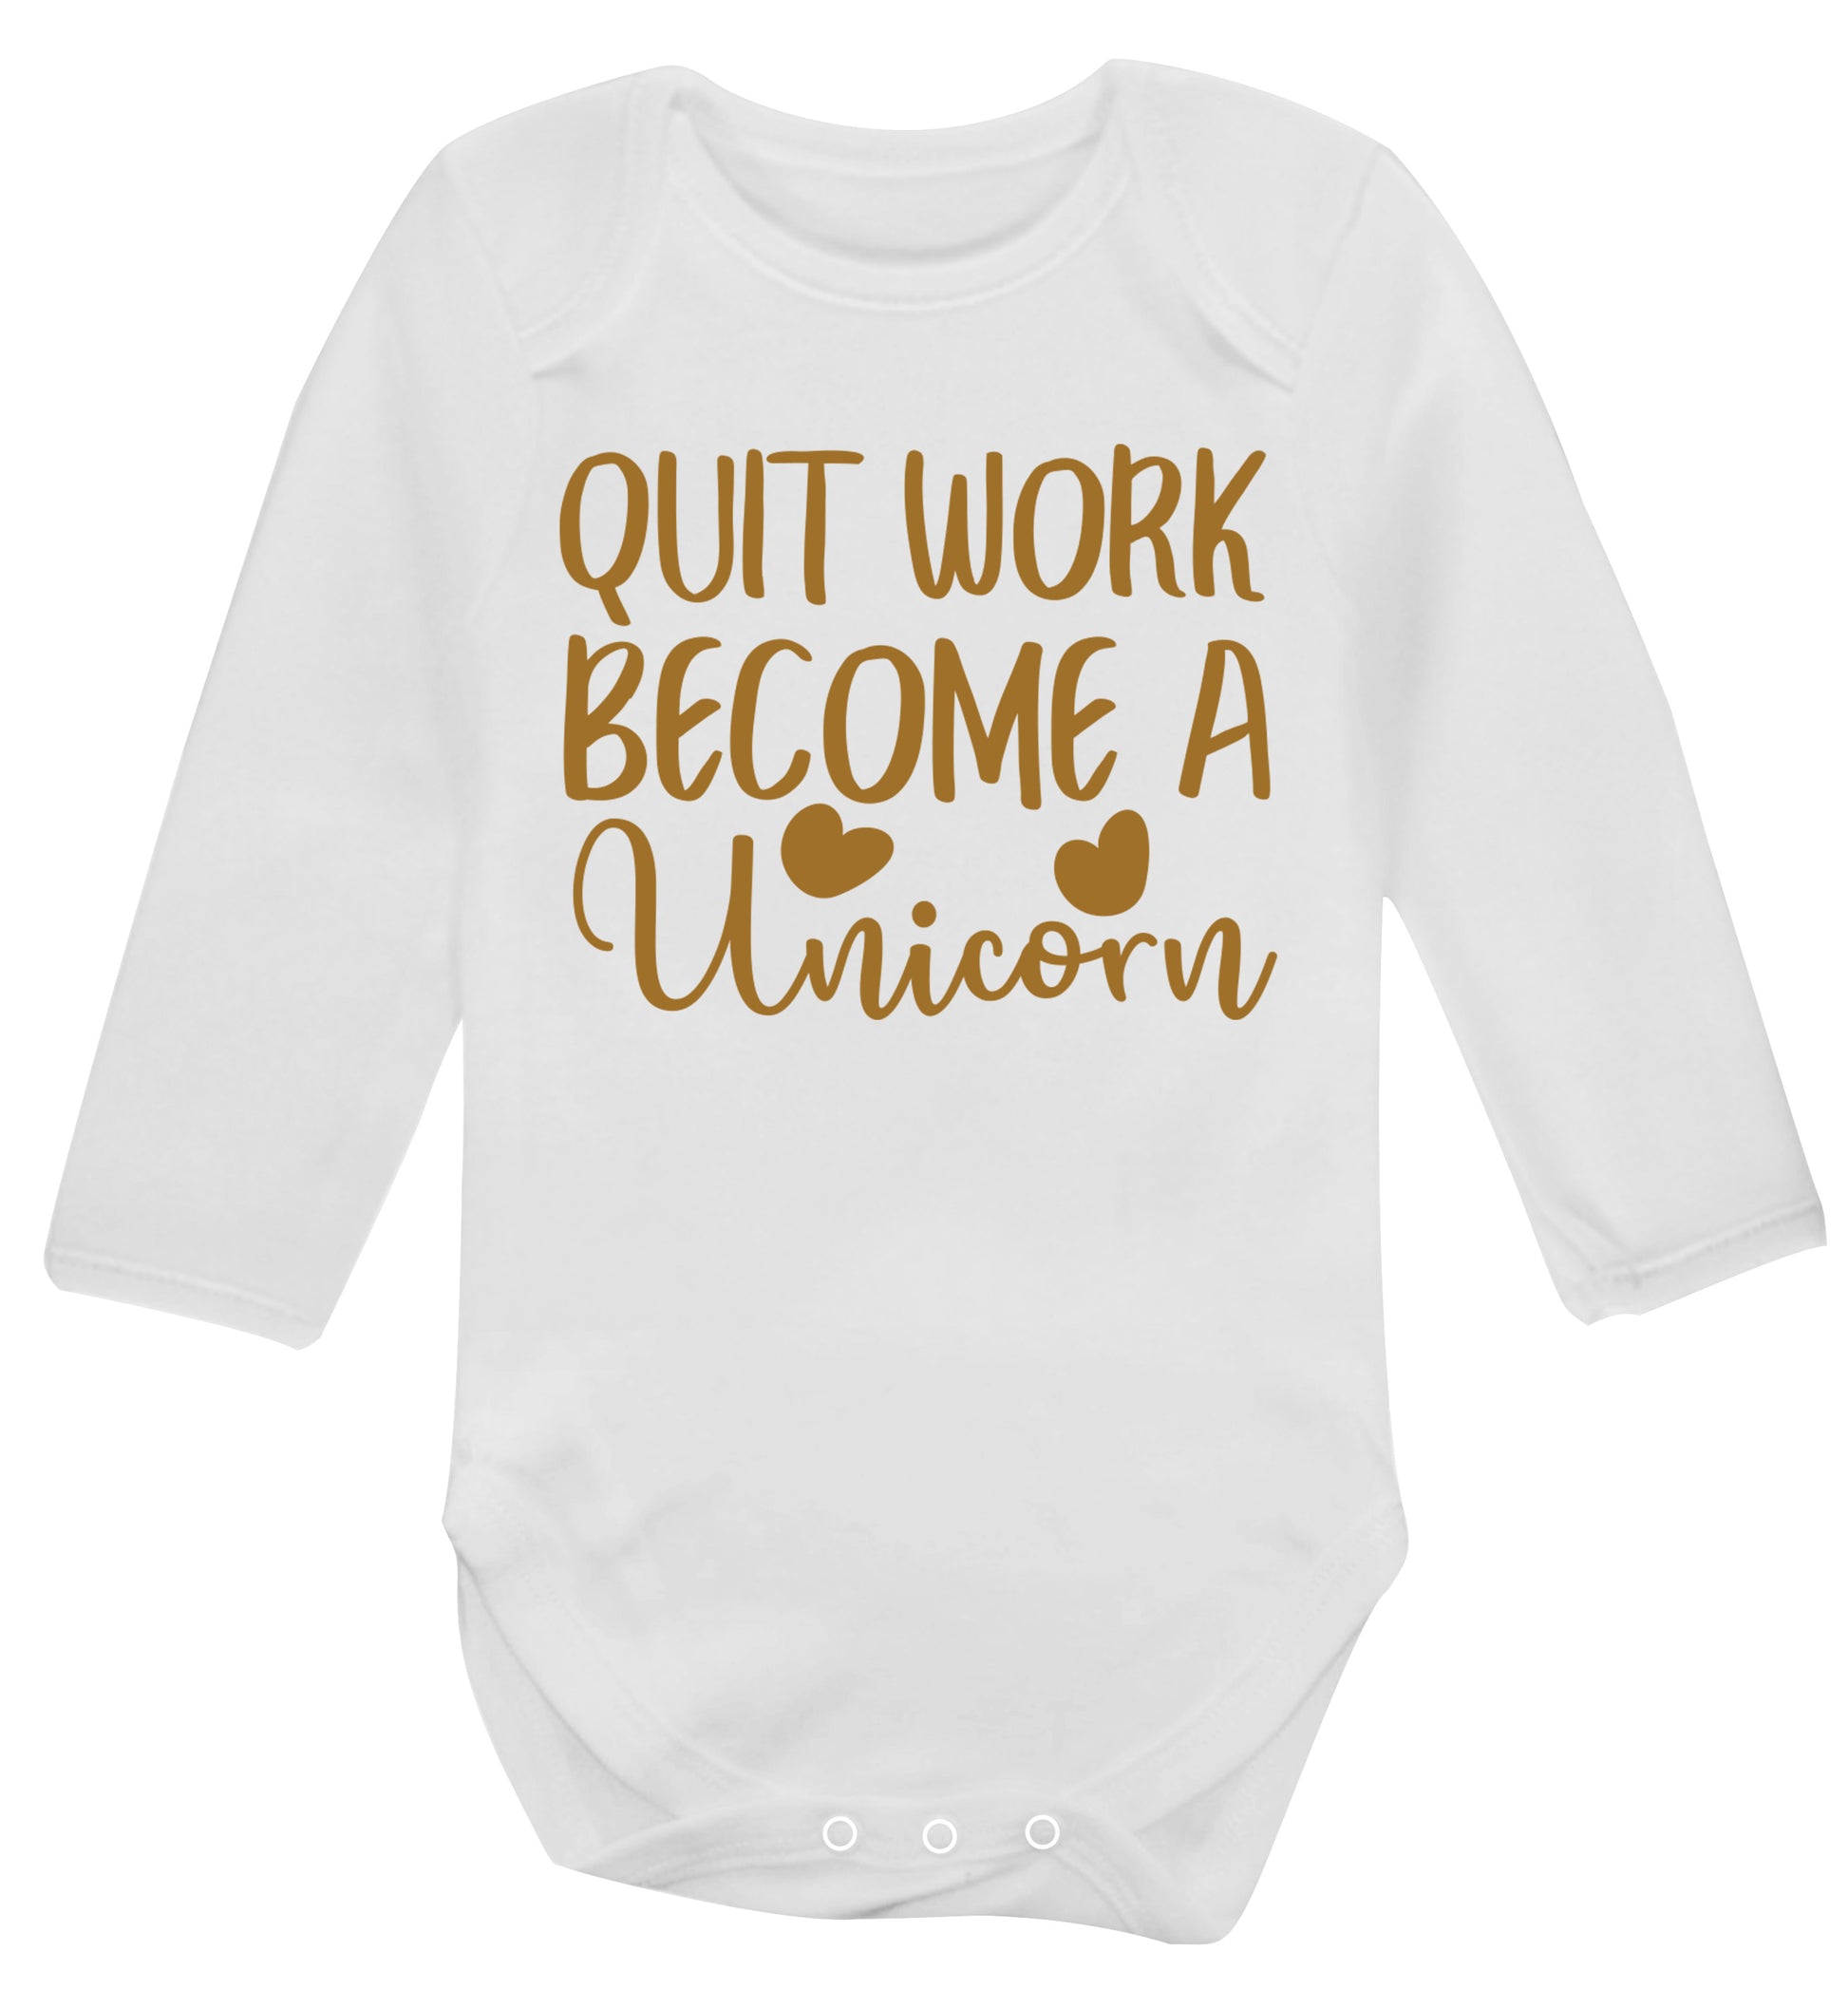 Quit work become a unicorn Baby Vest long sleeved white 6-12 months